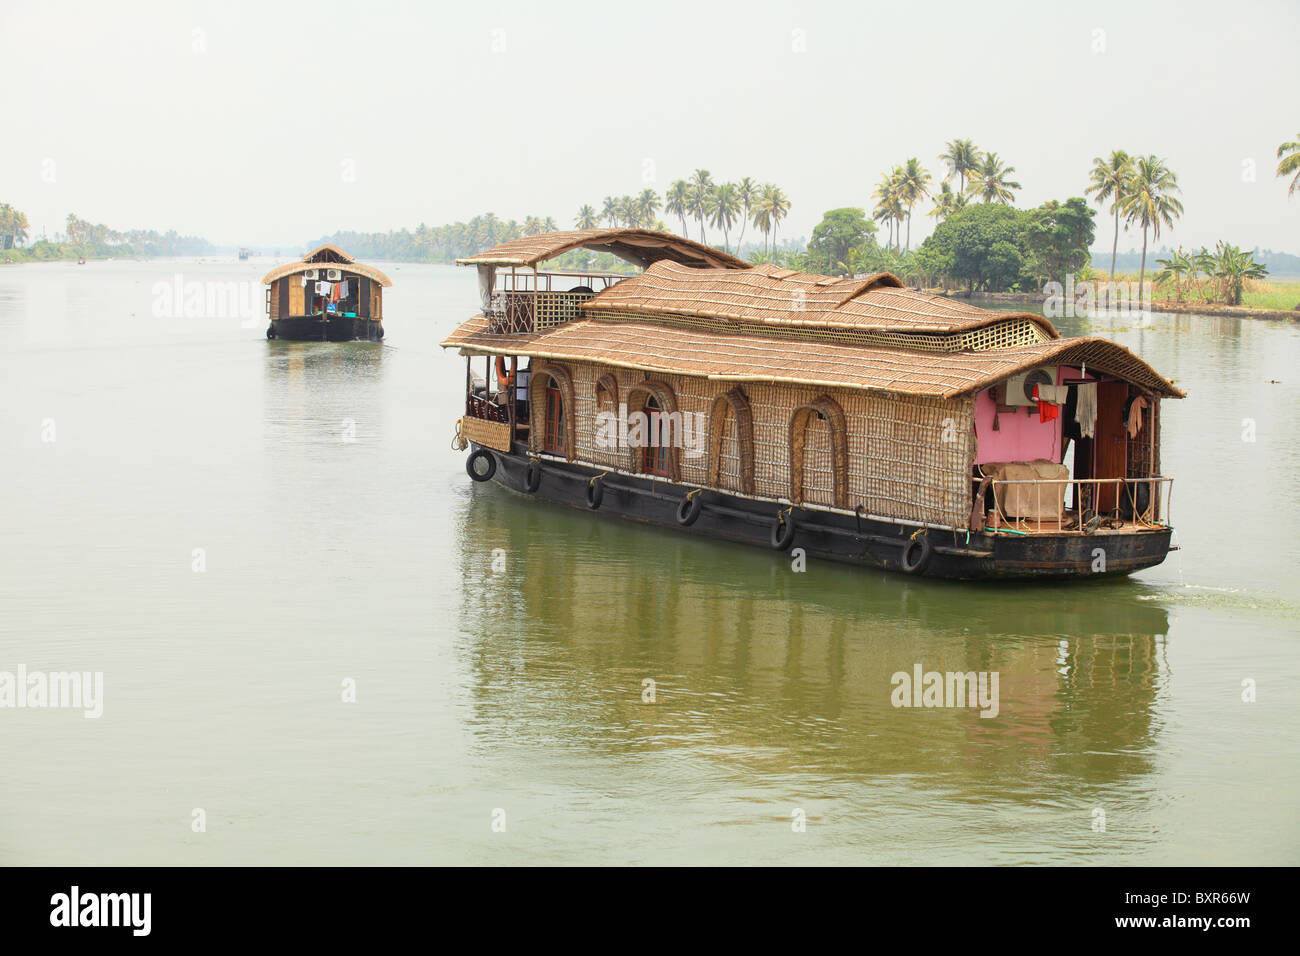 Thatched houseboats plying the Kerala Backwaters in India. River cruises are popular with foreign tourists and locals. Stock Photo